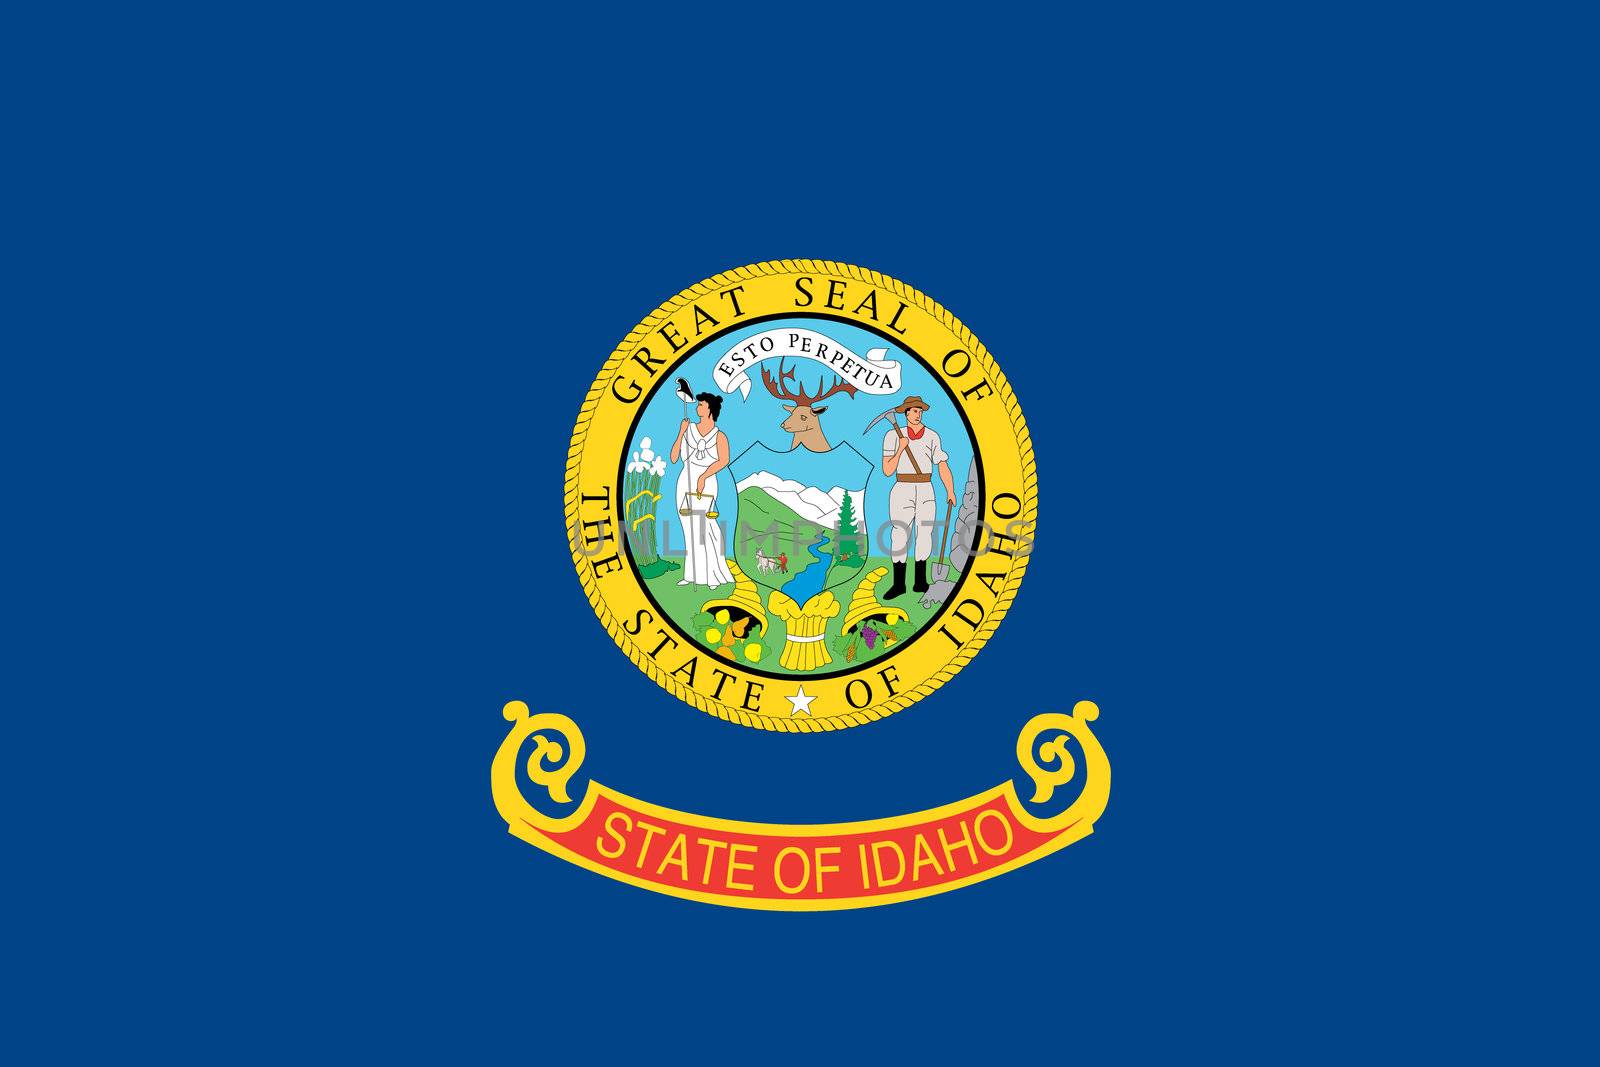 The Flag of the American State of Idaho